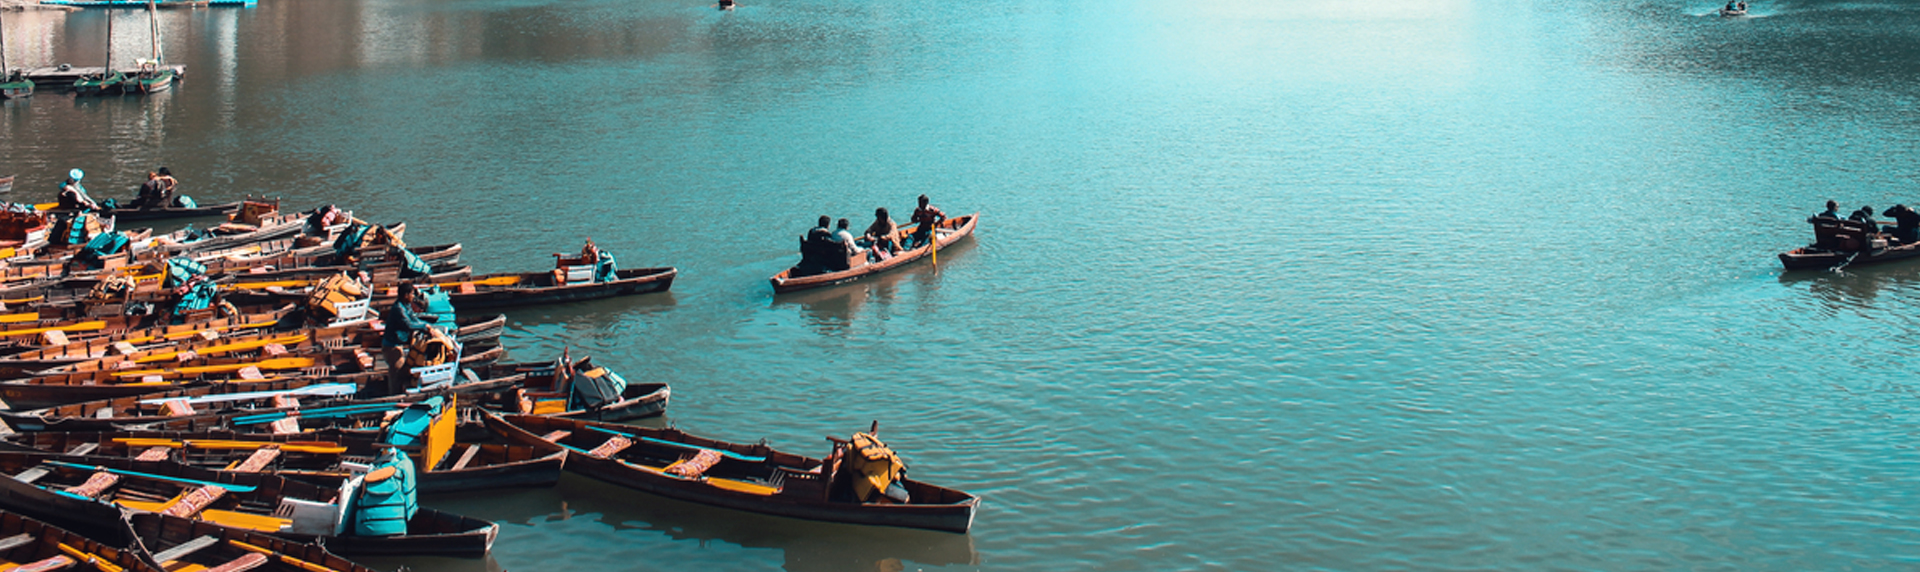 Boating in Nainital lake in Uttarakhand is one of the things to do in Nainital